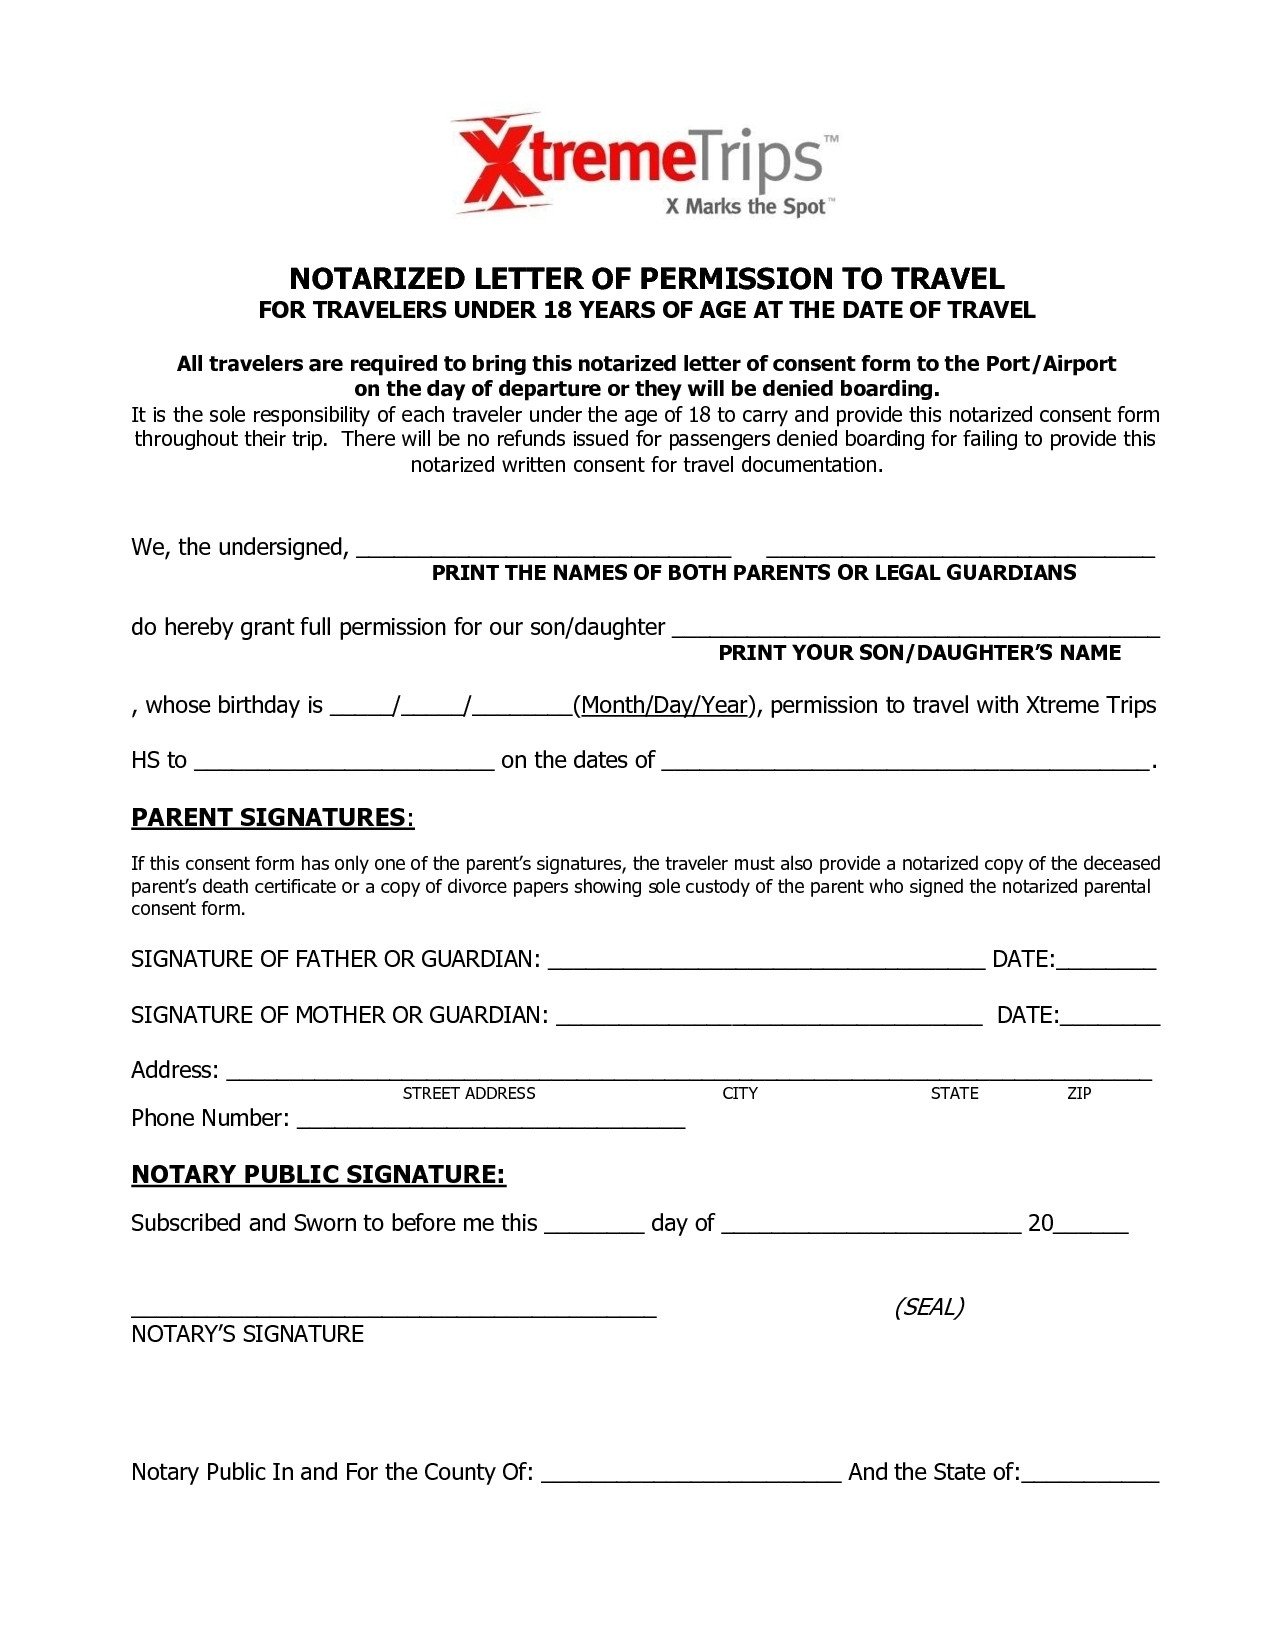 How To Write A Notarized Letter 2018